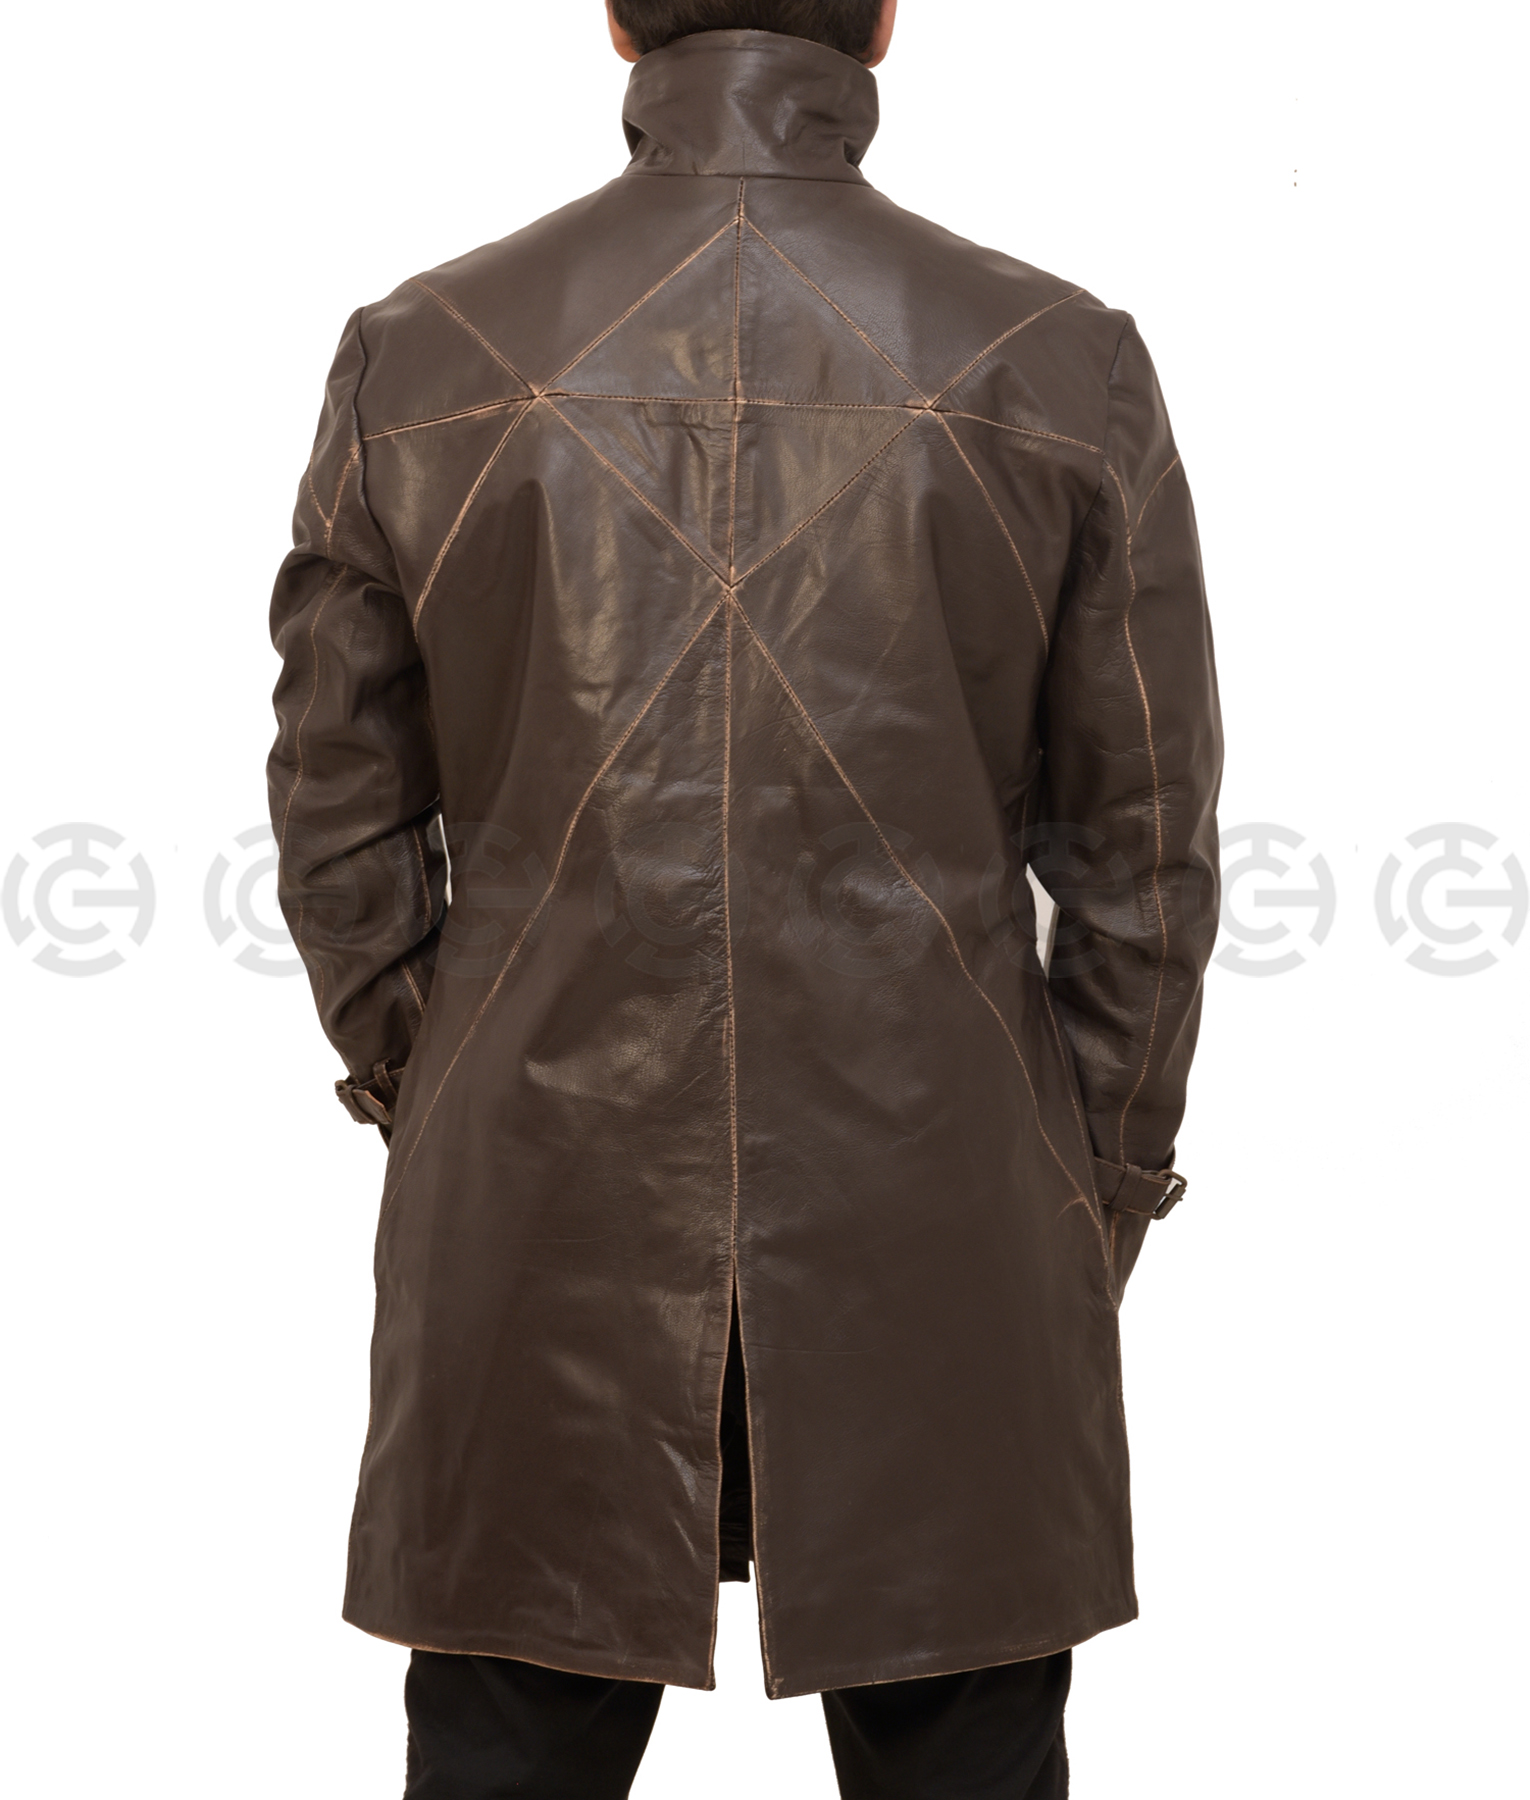 Aiden Pearce Trench Coat Costume From Watch Dog in Real Leather